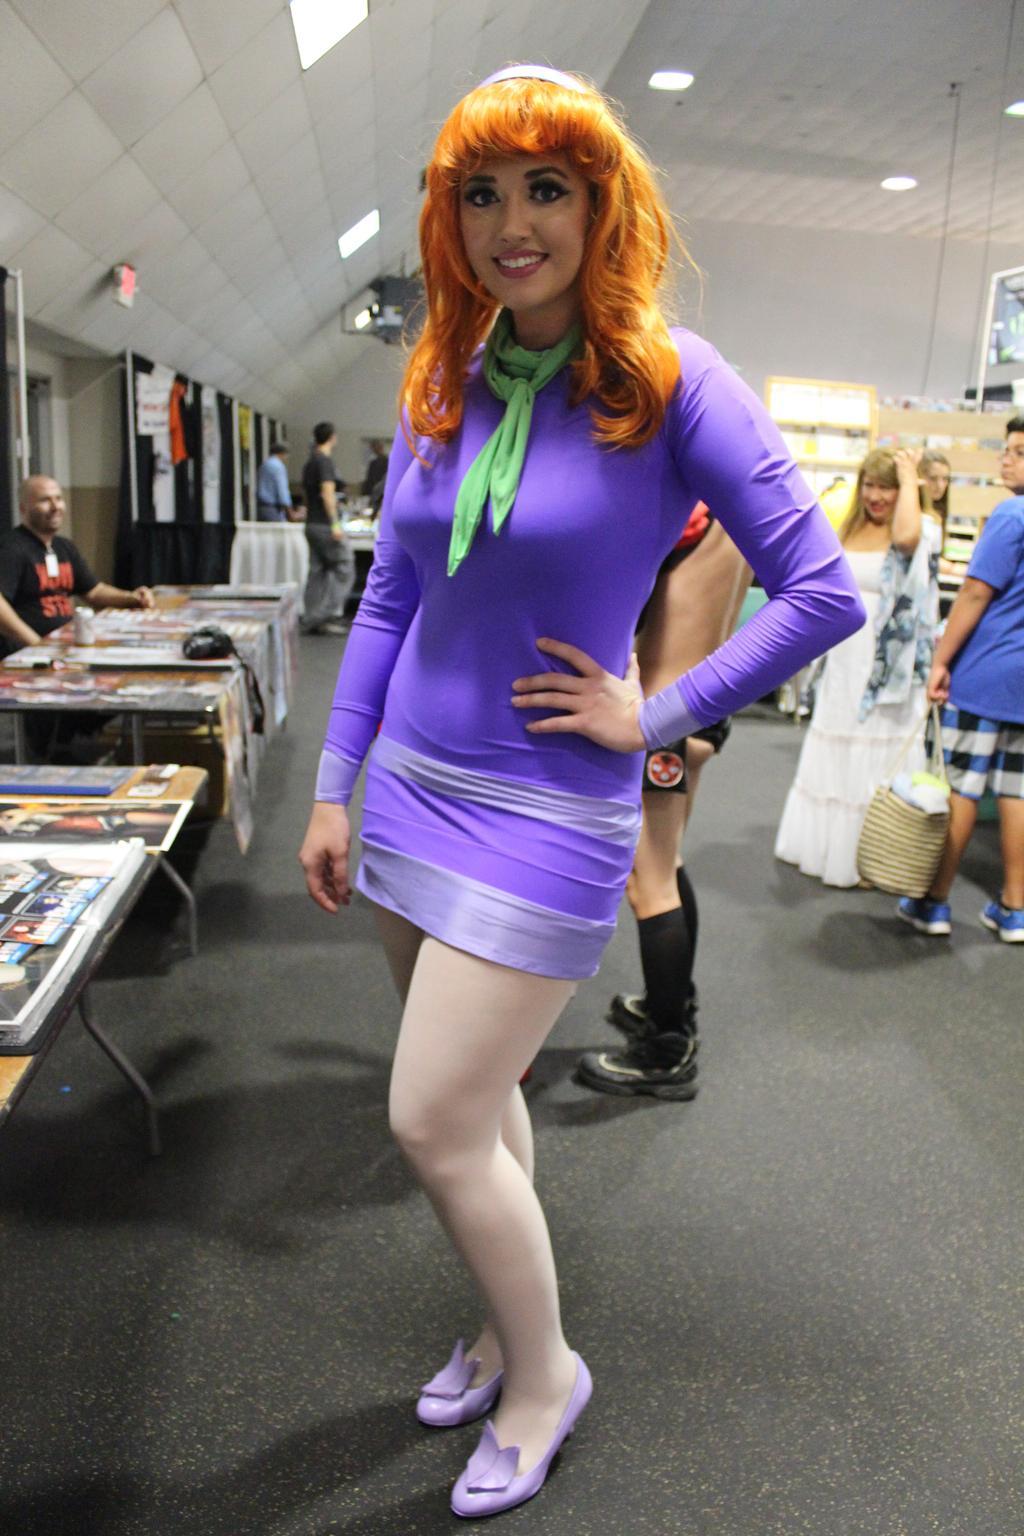 70+ Hot Pictures Of Daphne Blake From Scooby Doo Which Are Sure to Catch Your Attention 105